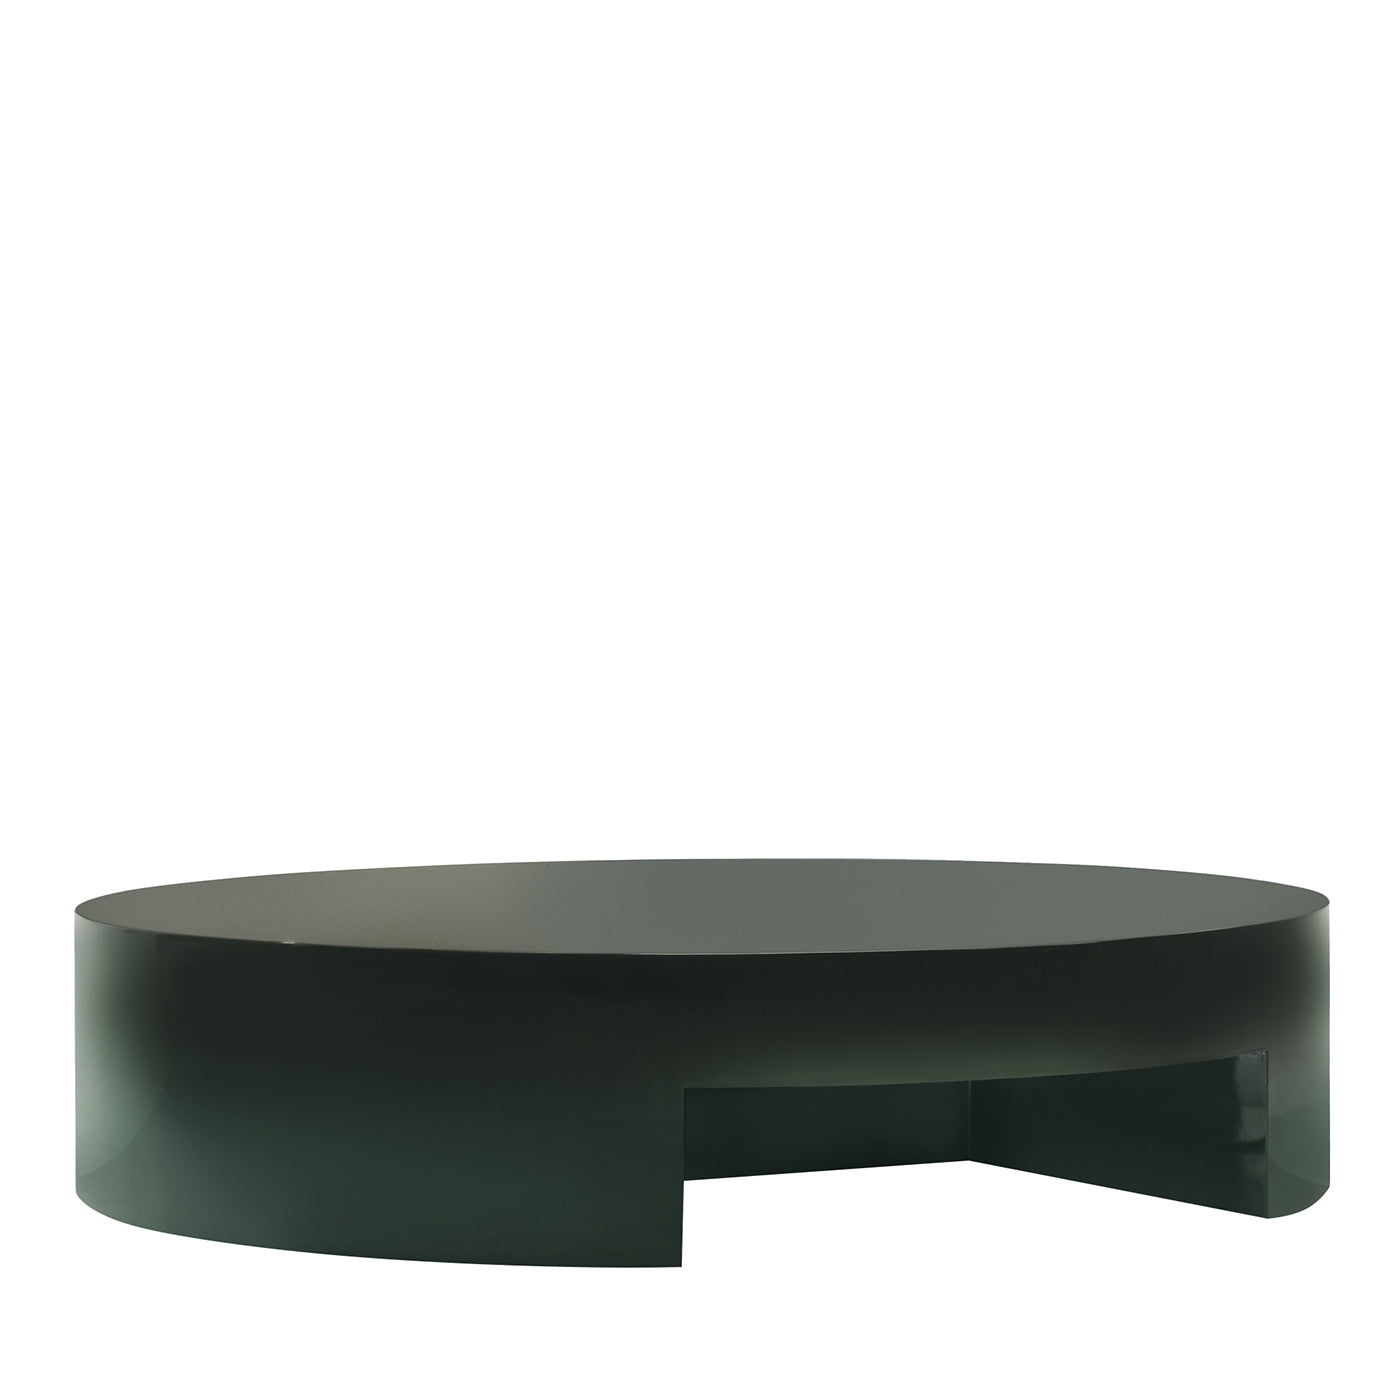 Maryland Green Coffee Table by Dainelli Studio - Main view